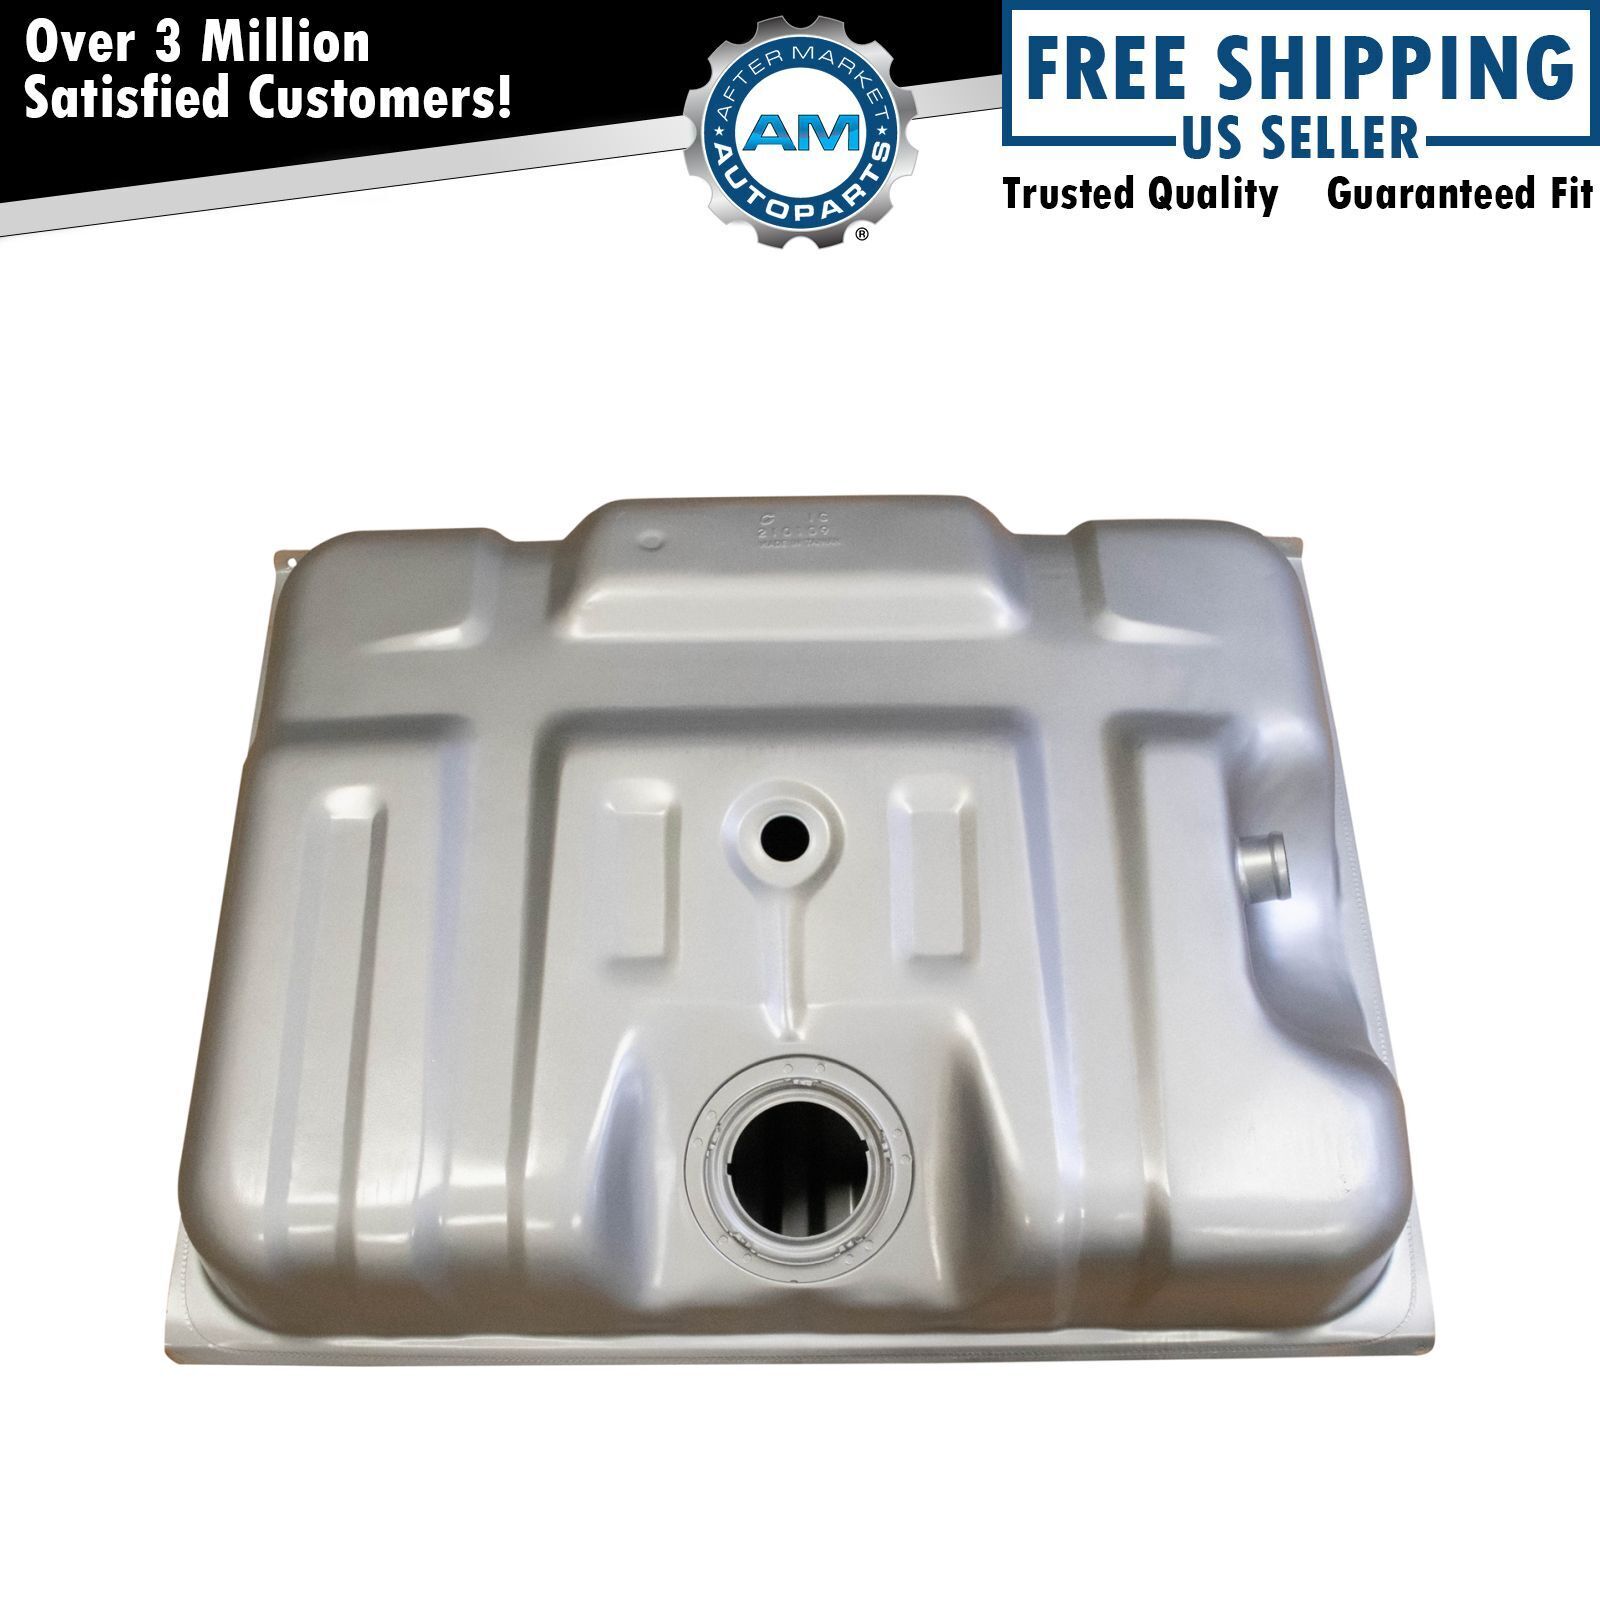 18 Gallon Rear Mount Gas Fuel Tank for 90-97 Ford F Series Pickup Truck